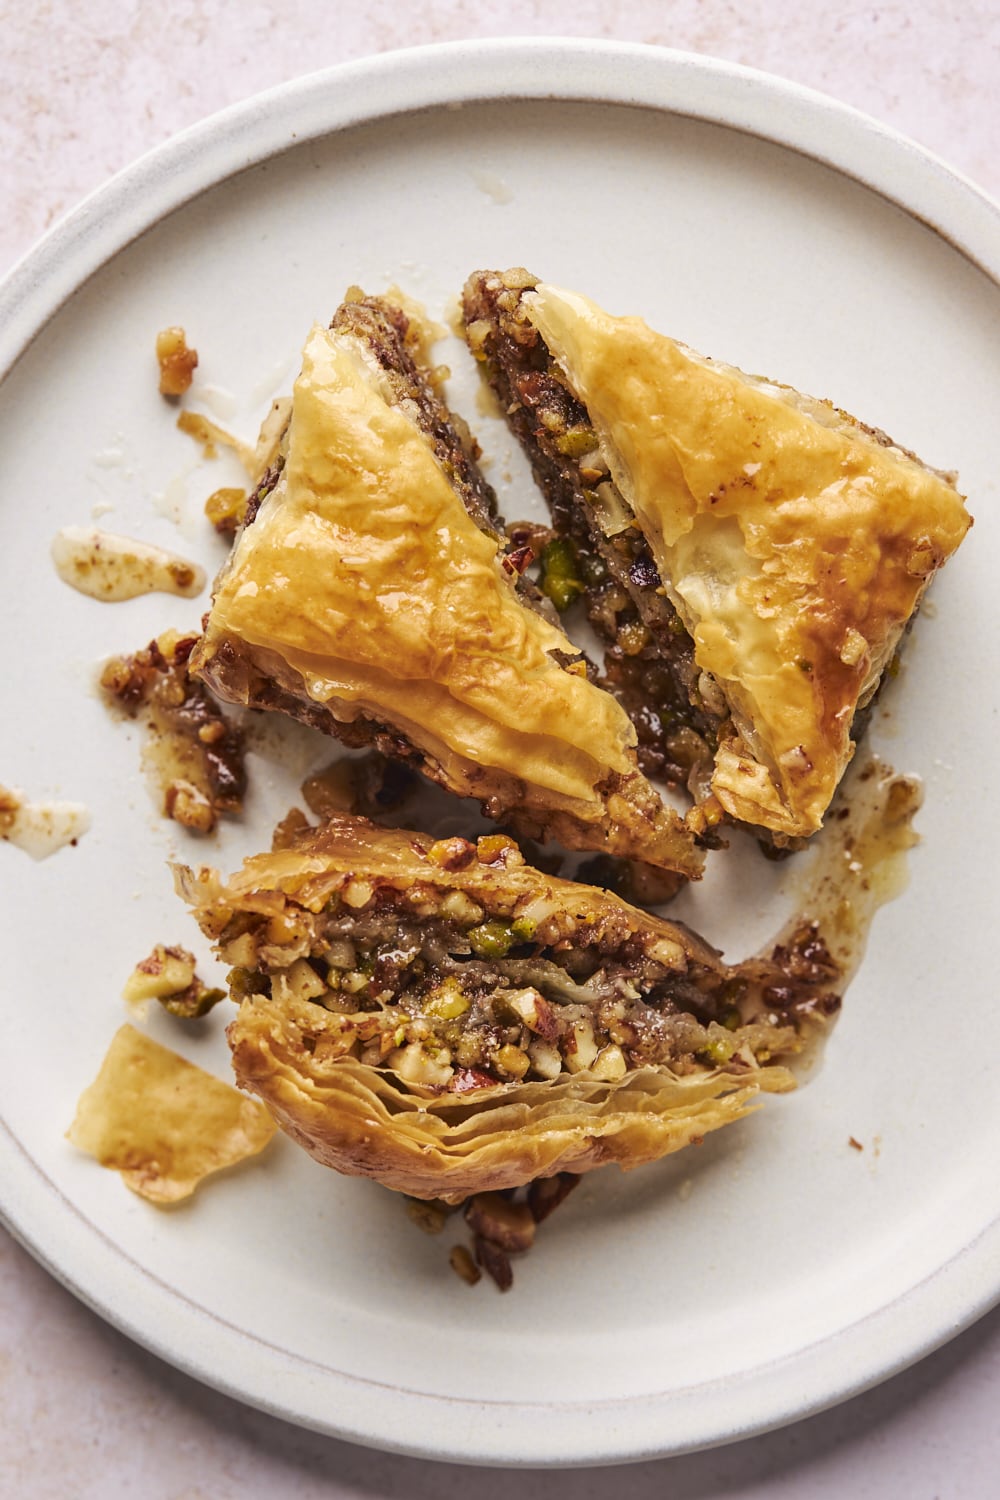 How to Make Greek Baklava, Phyllo Pastry